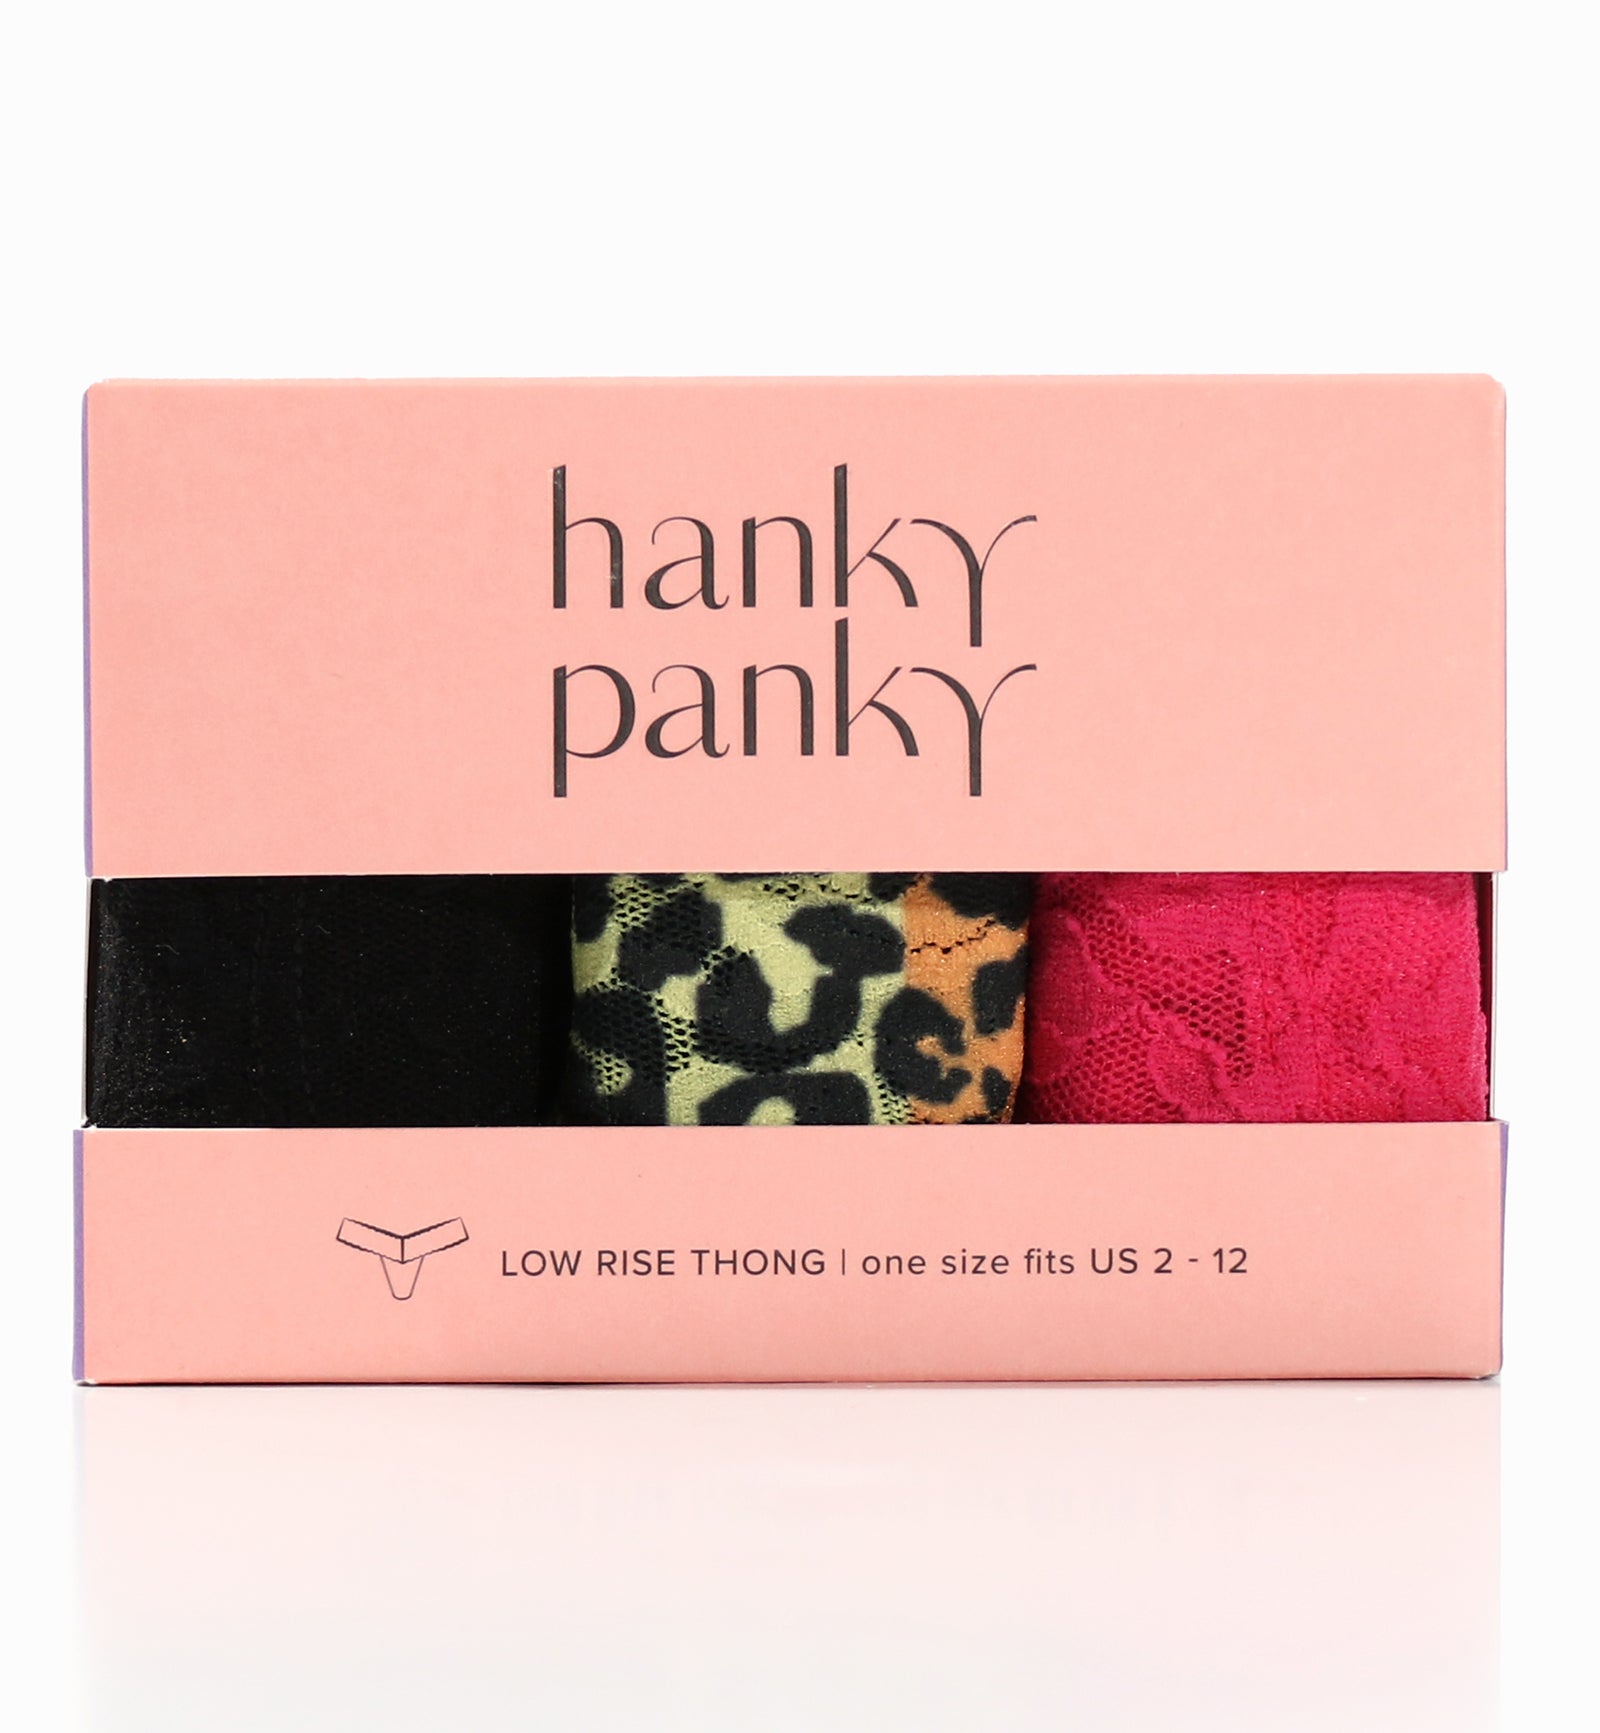 Hanky Panky 3-PACK Signature Lace Low Rise Thong (49113PK),It's Electric - Black/It's Electric/Morning Glory,One Size